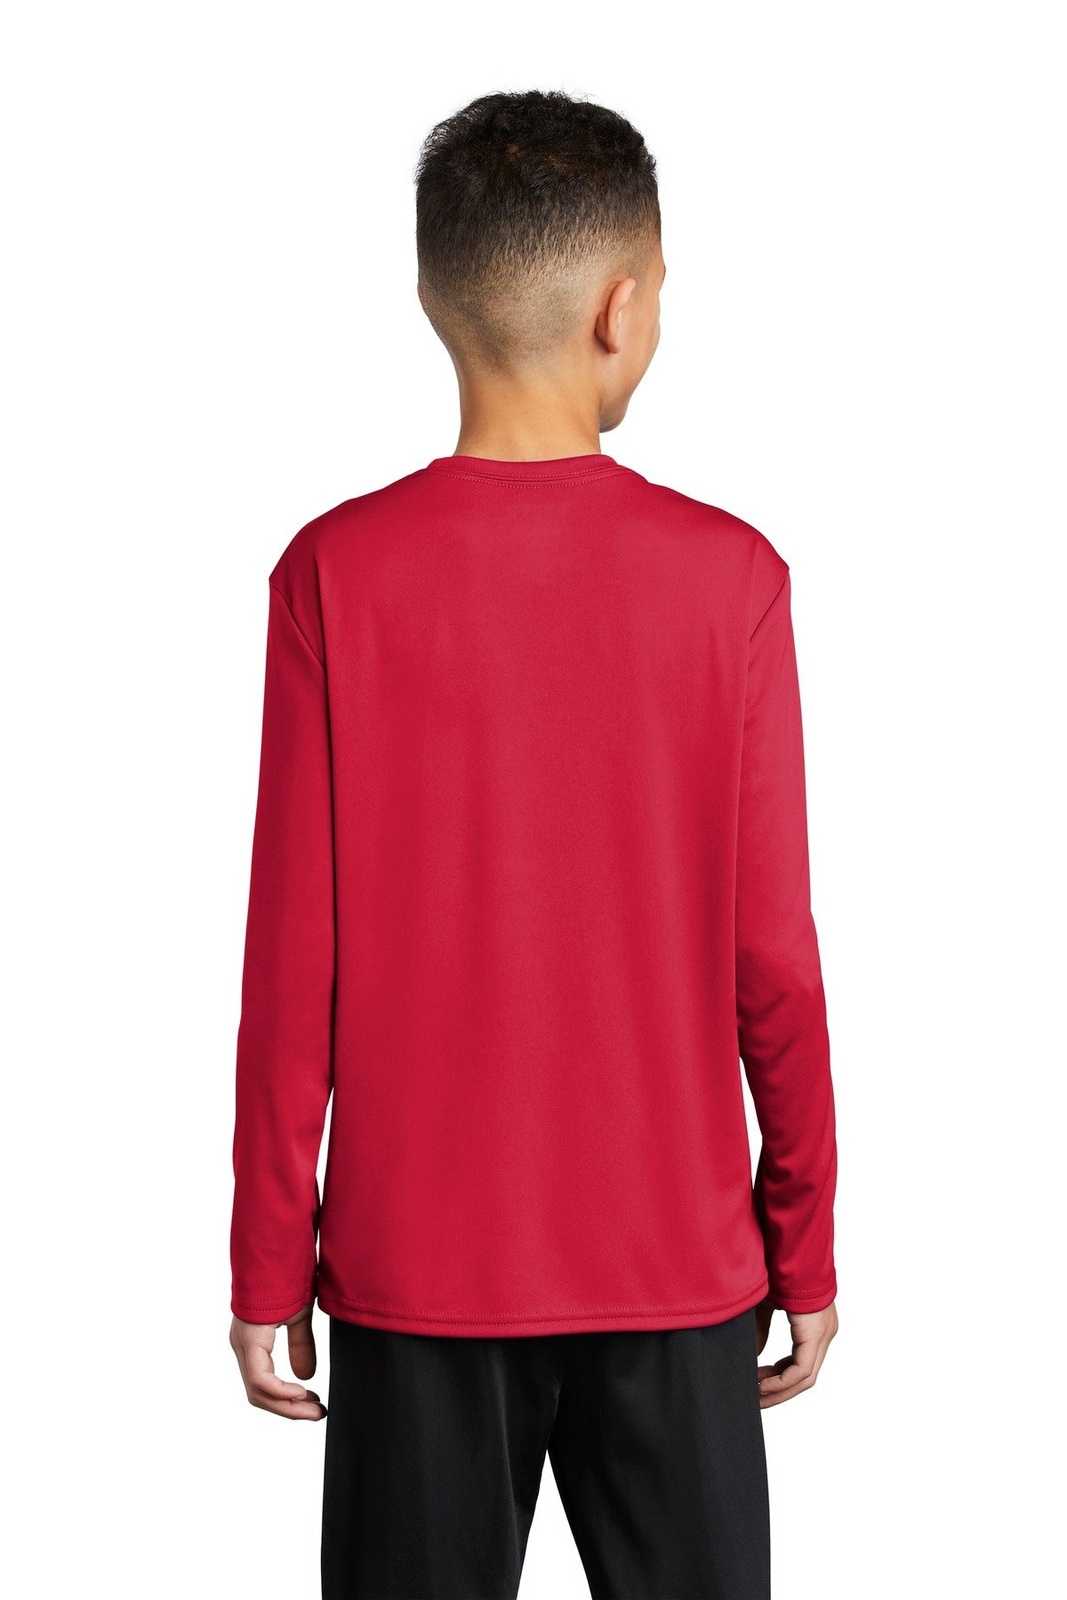 Port & Company PC380YLS Youth Long Sleeve Performance Tee - Red - HIT a Double - 1